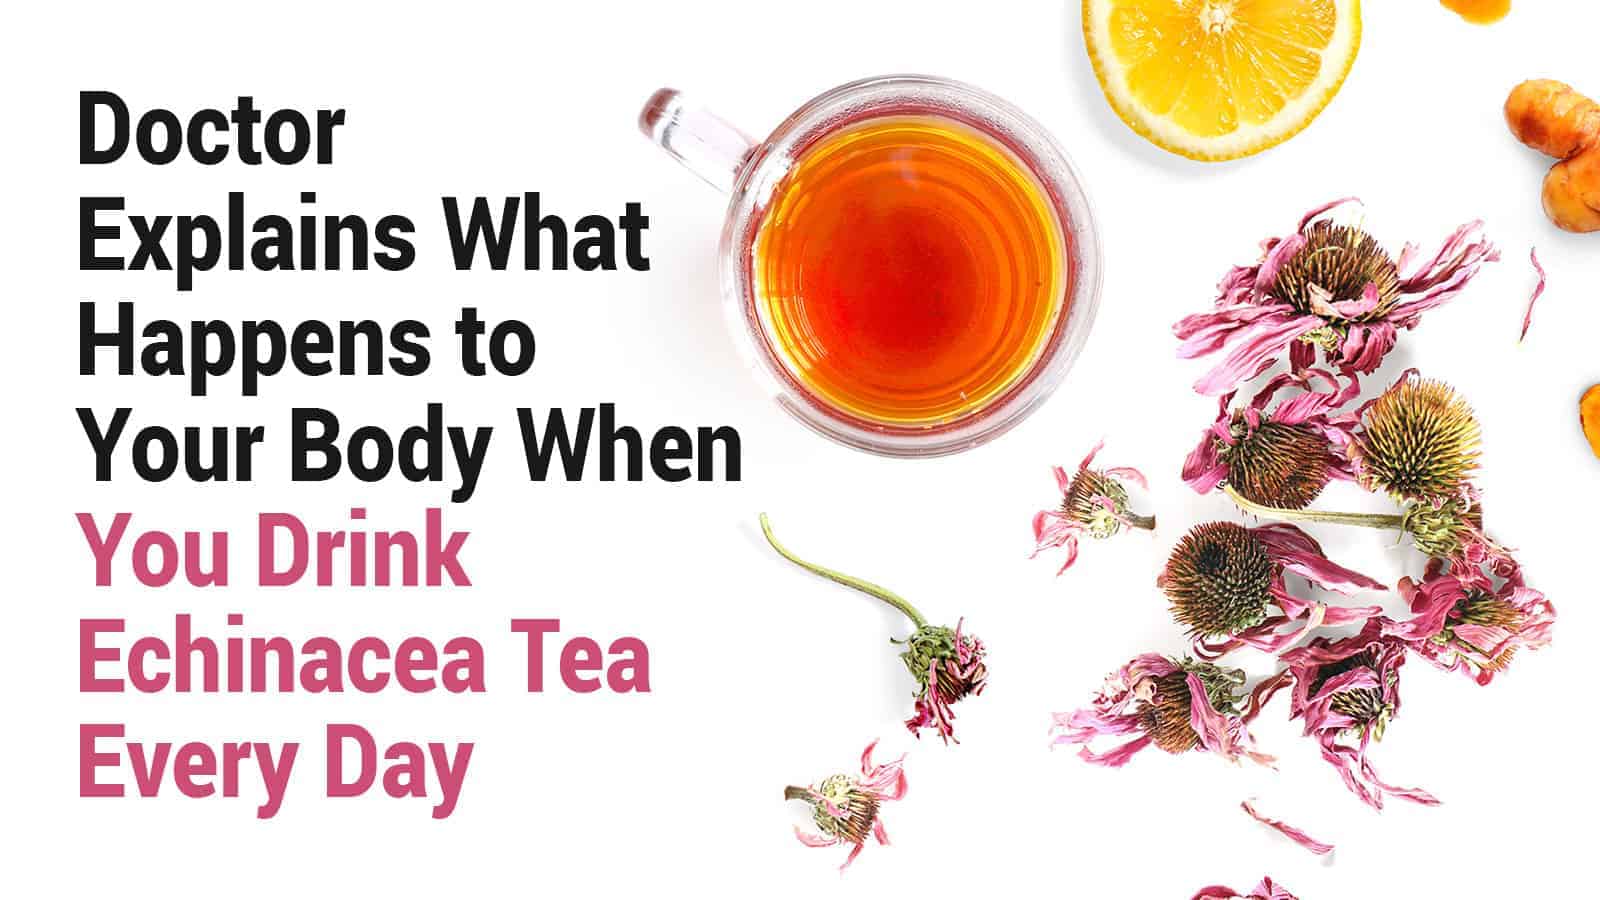 Doctor Explains What Happens to Your Body When You Drink Echinacea Tea Every Day